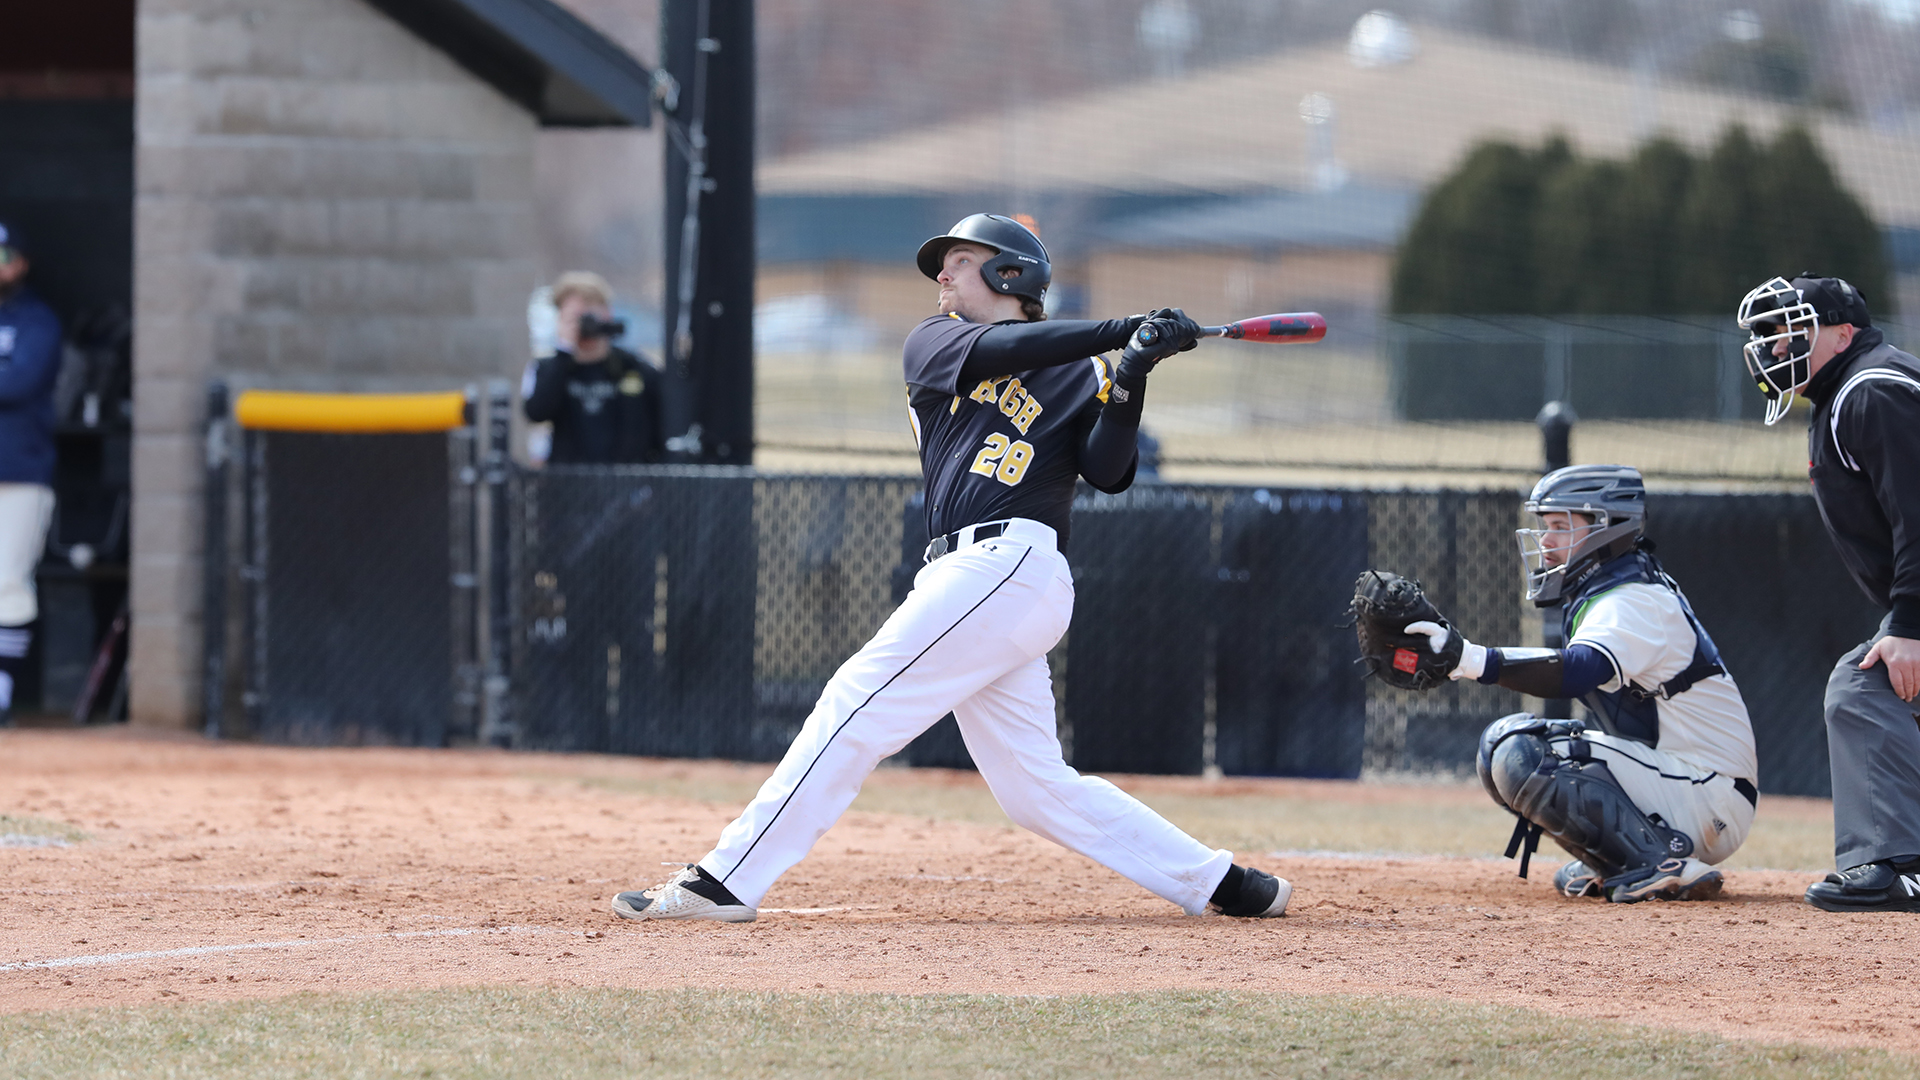 Jake Andersen hit a grand slam and finished UW-Oshkosh's 11-2 win over UW-Stout with a career-high five runs batted in.